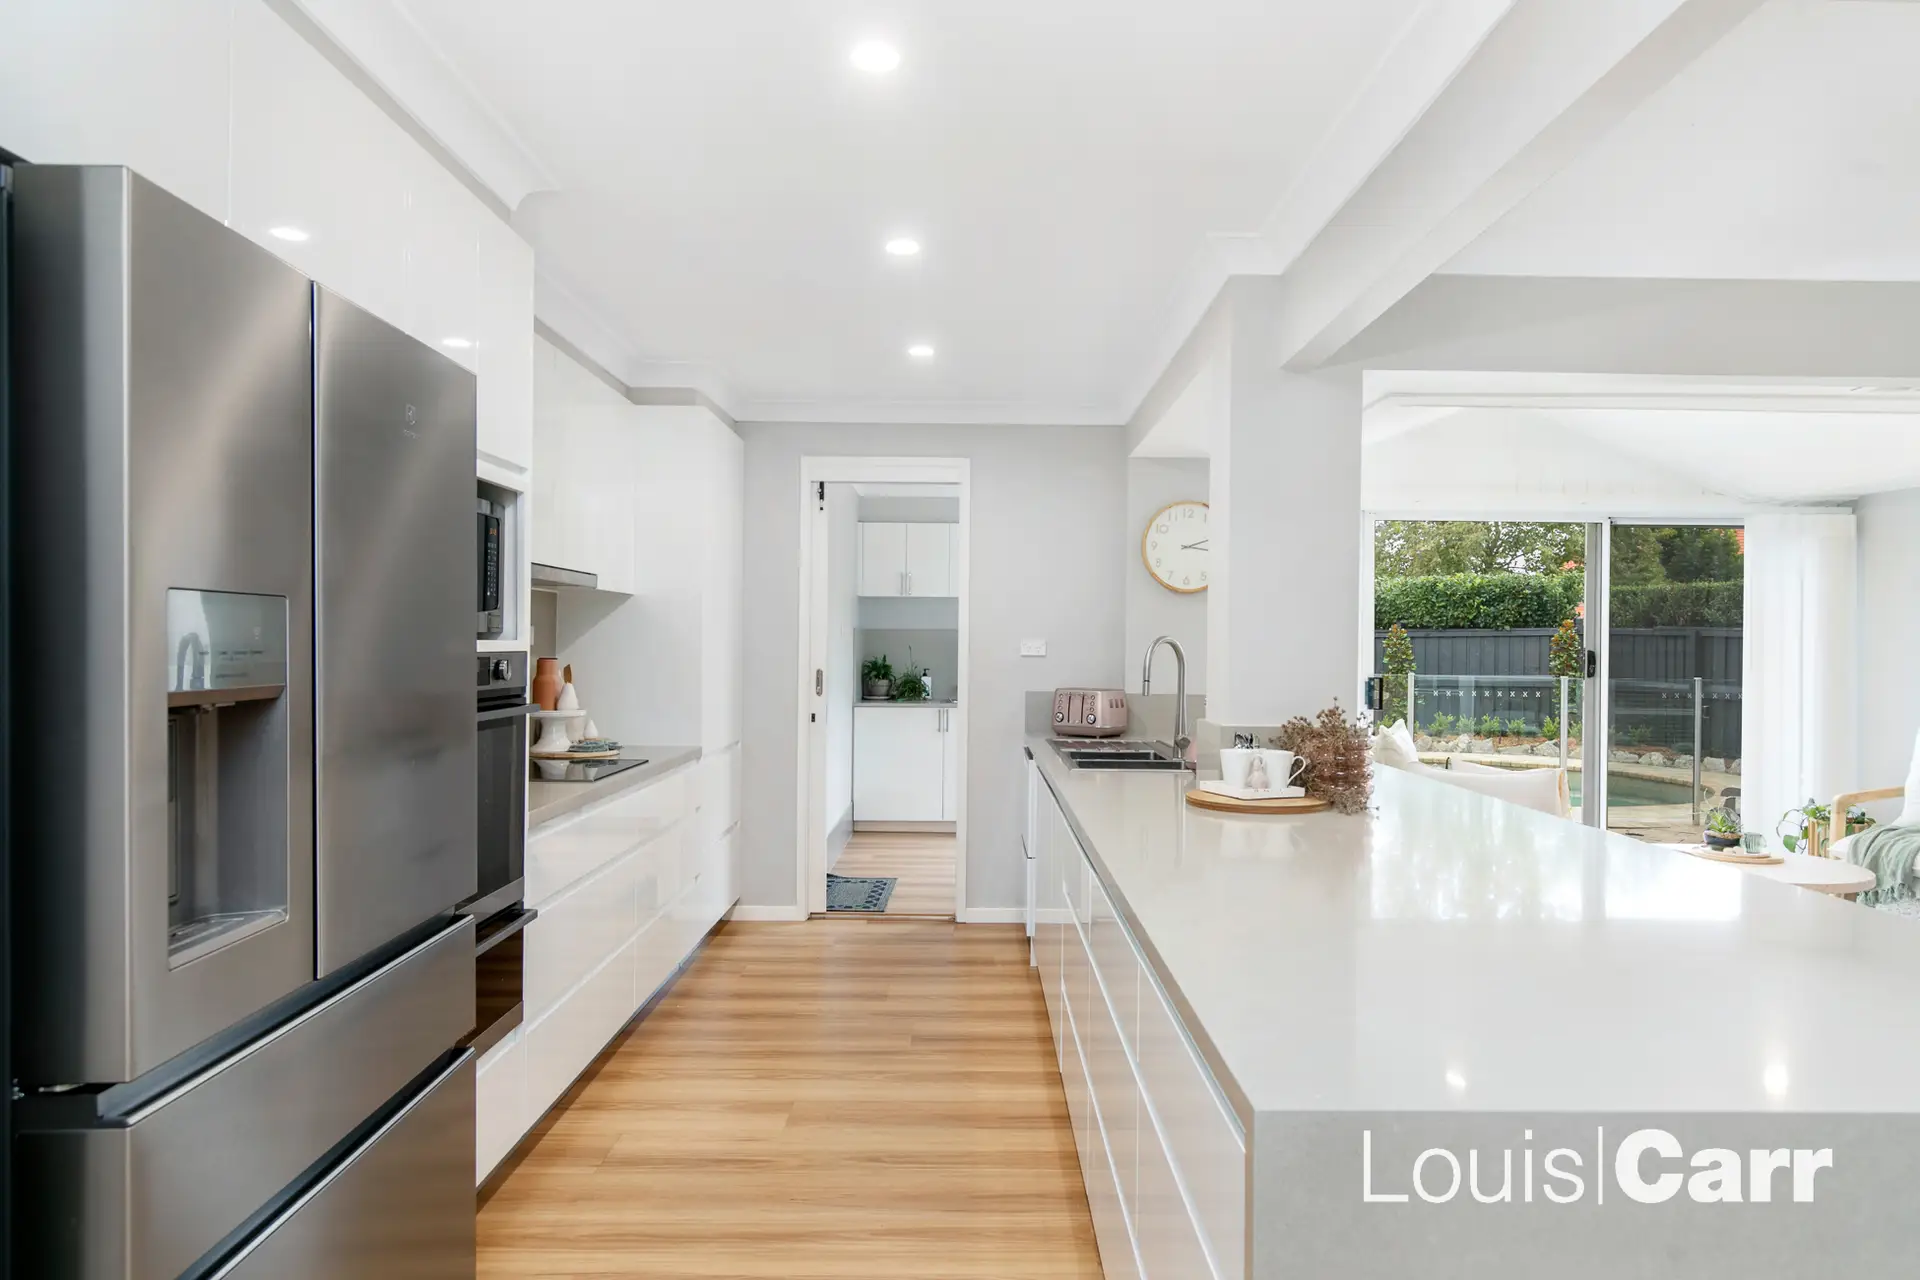 Photo #3: 5 Francis Oakes Way, West Pennant Hills - Sold by Louis Carr Real Estate